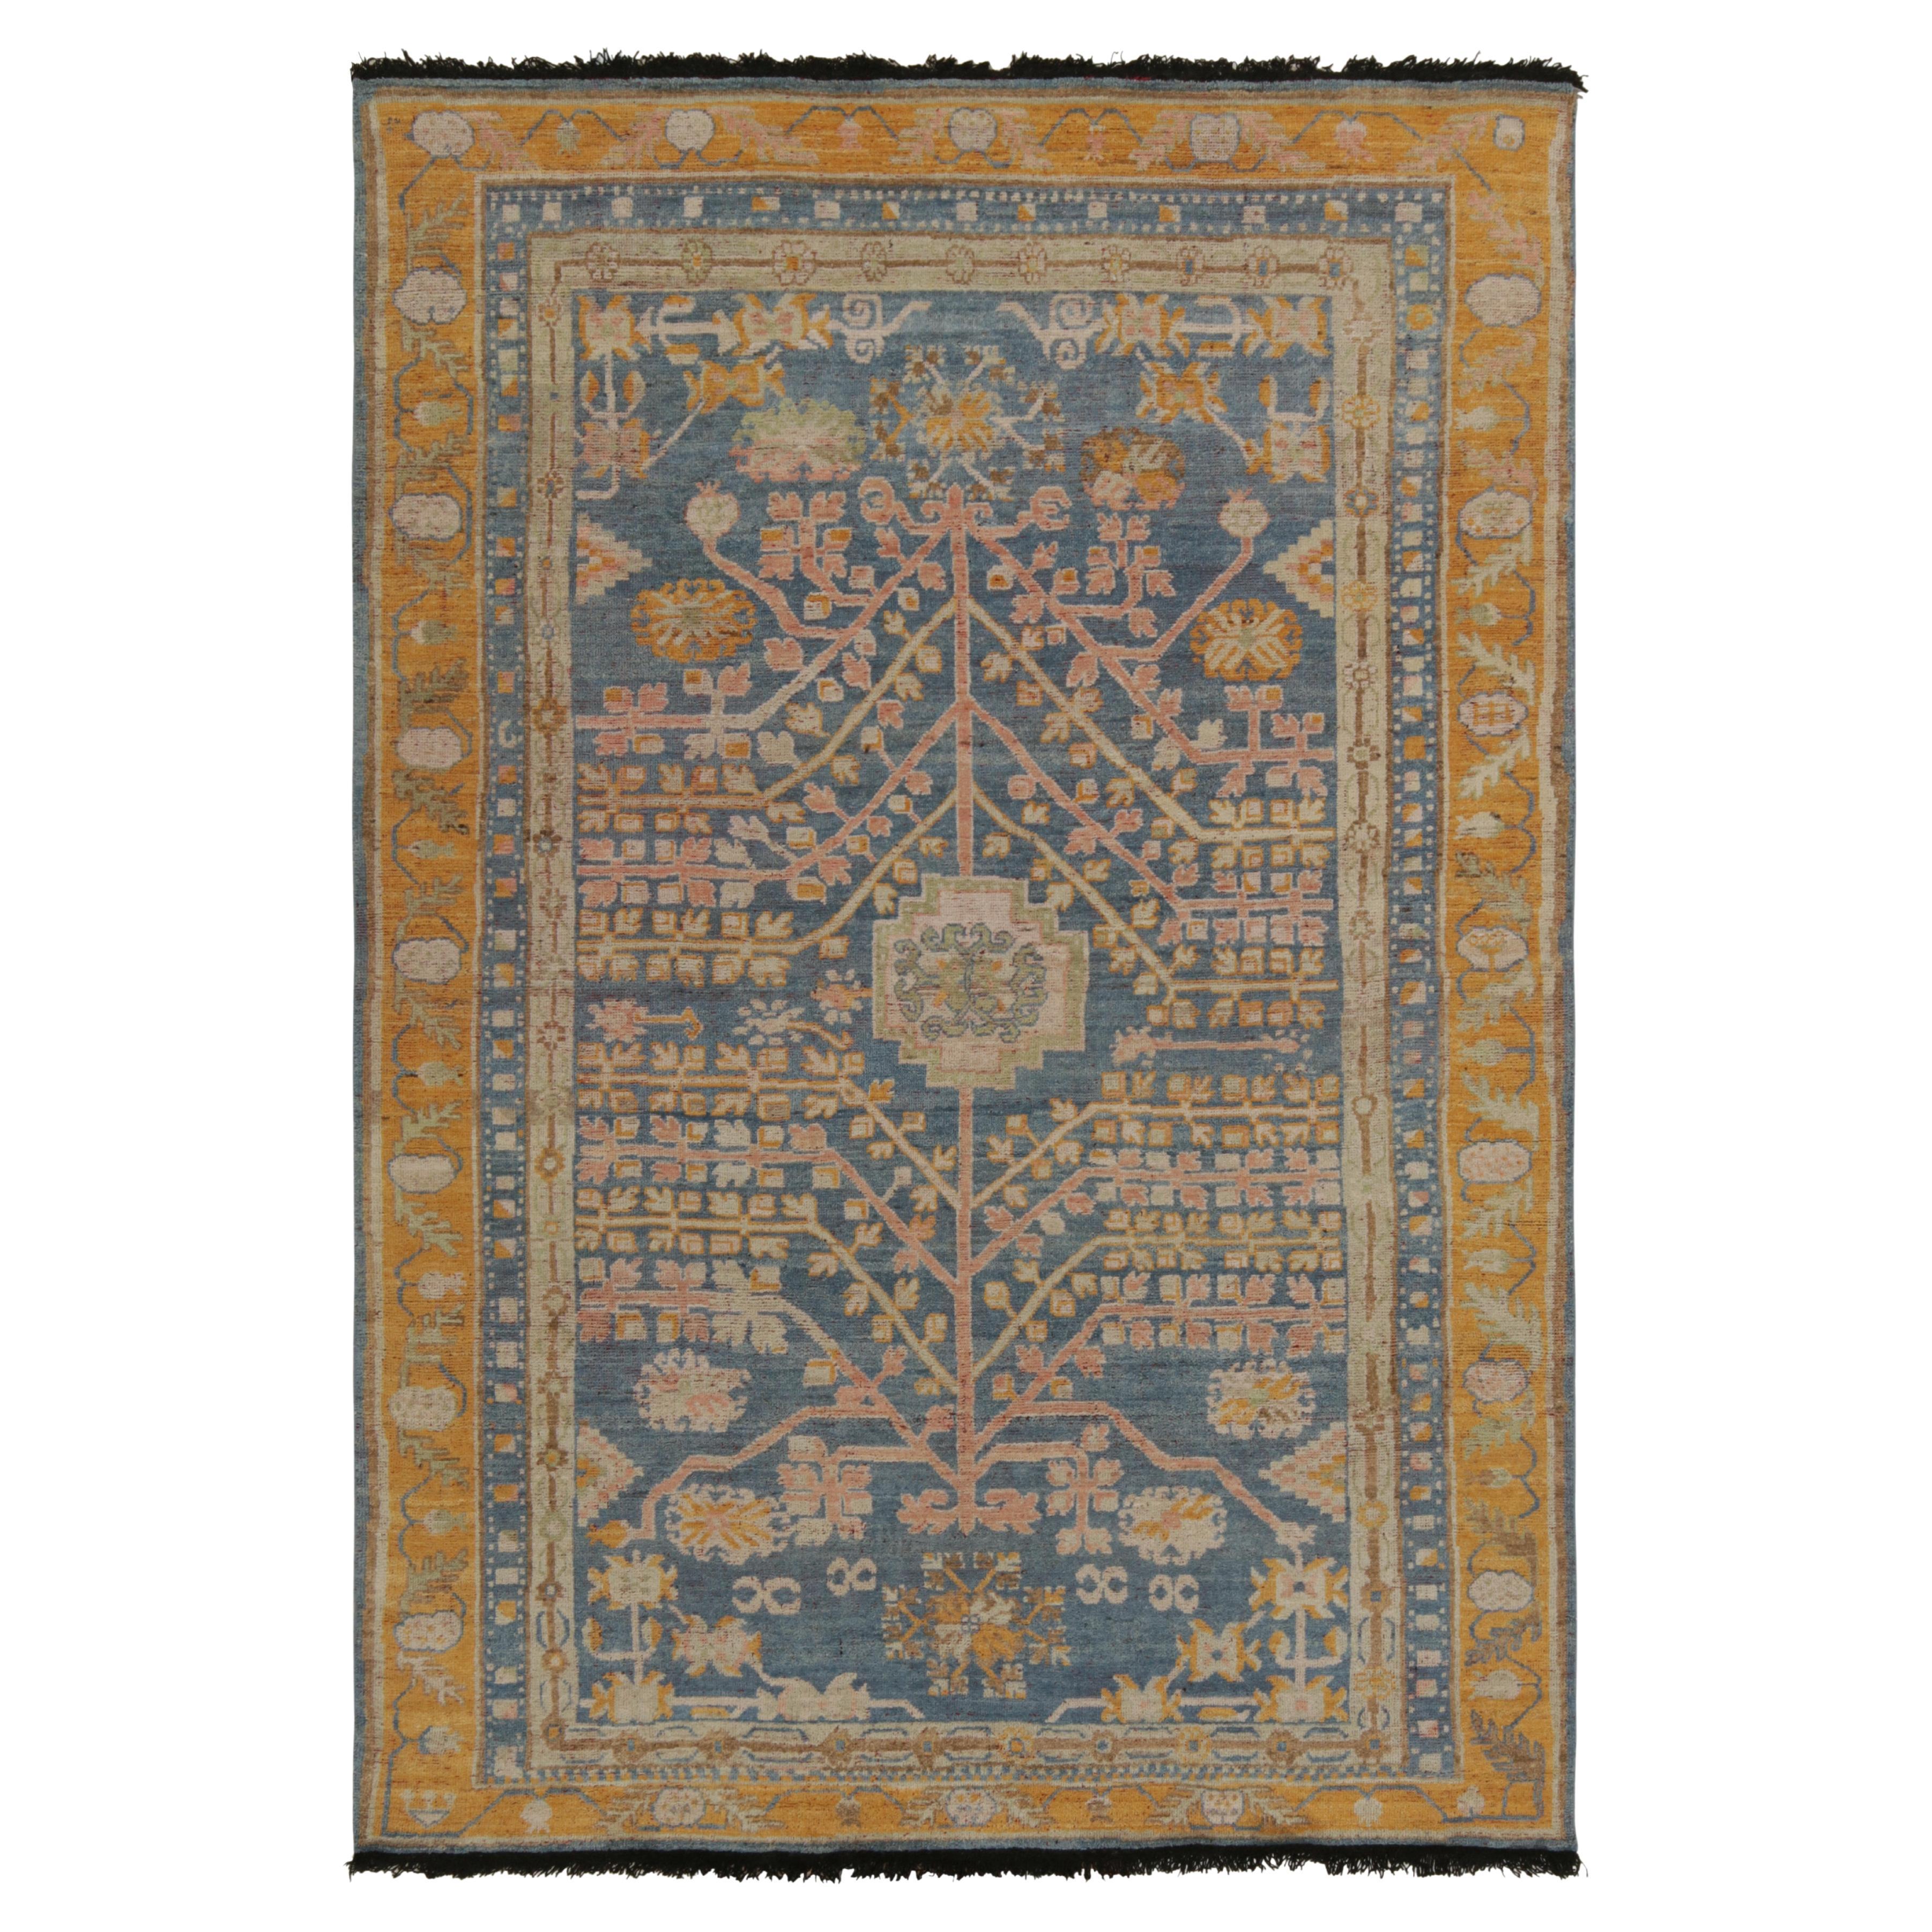 Rug & Kilim’s Khotan Style Rug in Blue, Gold and Pink Geometric-Floral Patterns For Sale